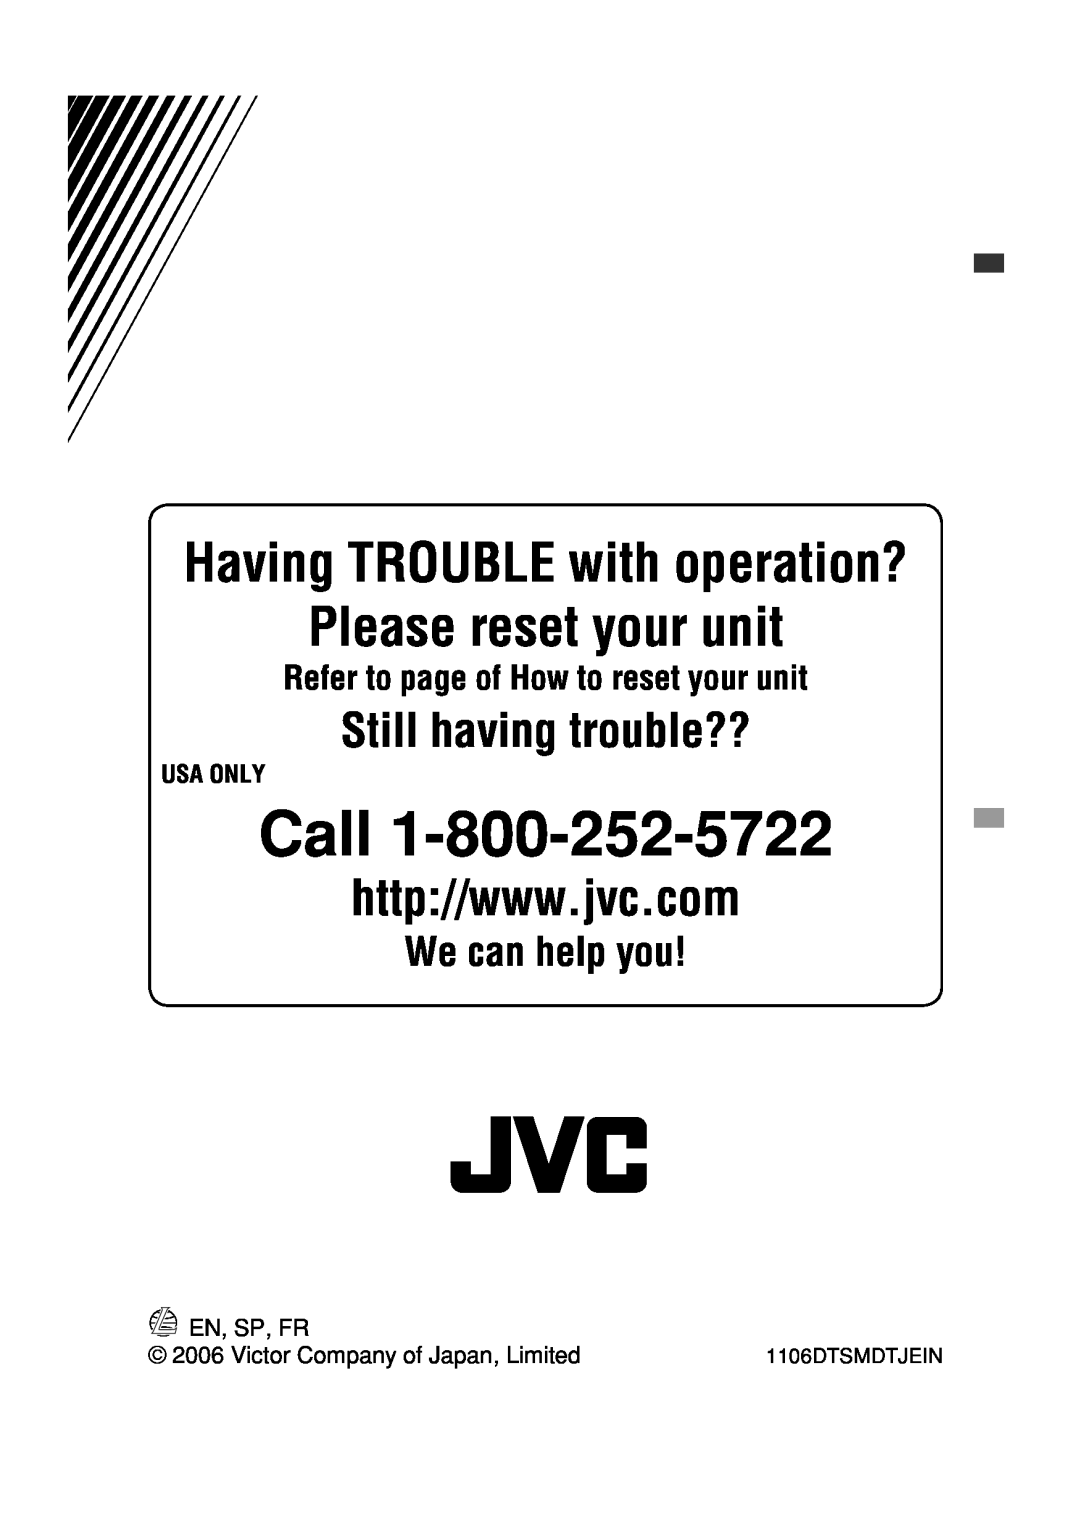 JVC GET0425-001A manual We can help you, Refer to page of How to reset your unit, Usa Only, Call, Please reset your unit 